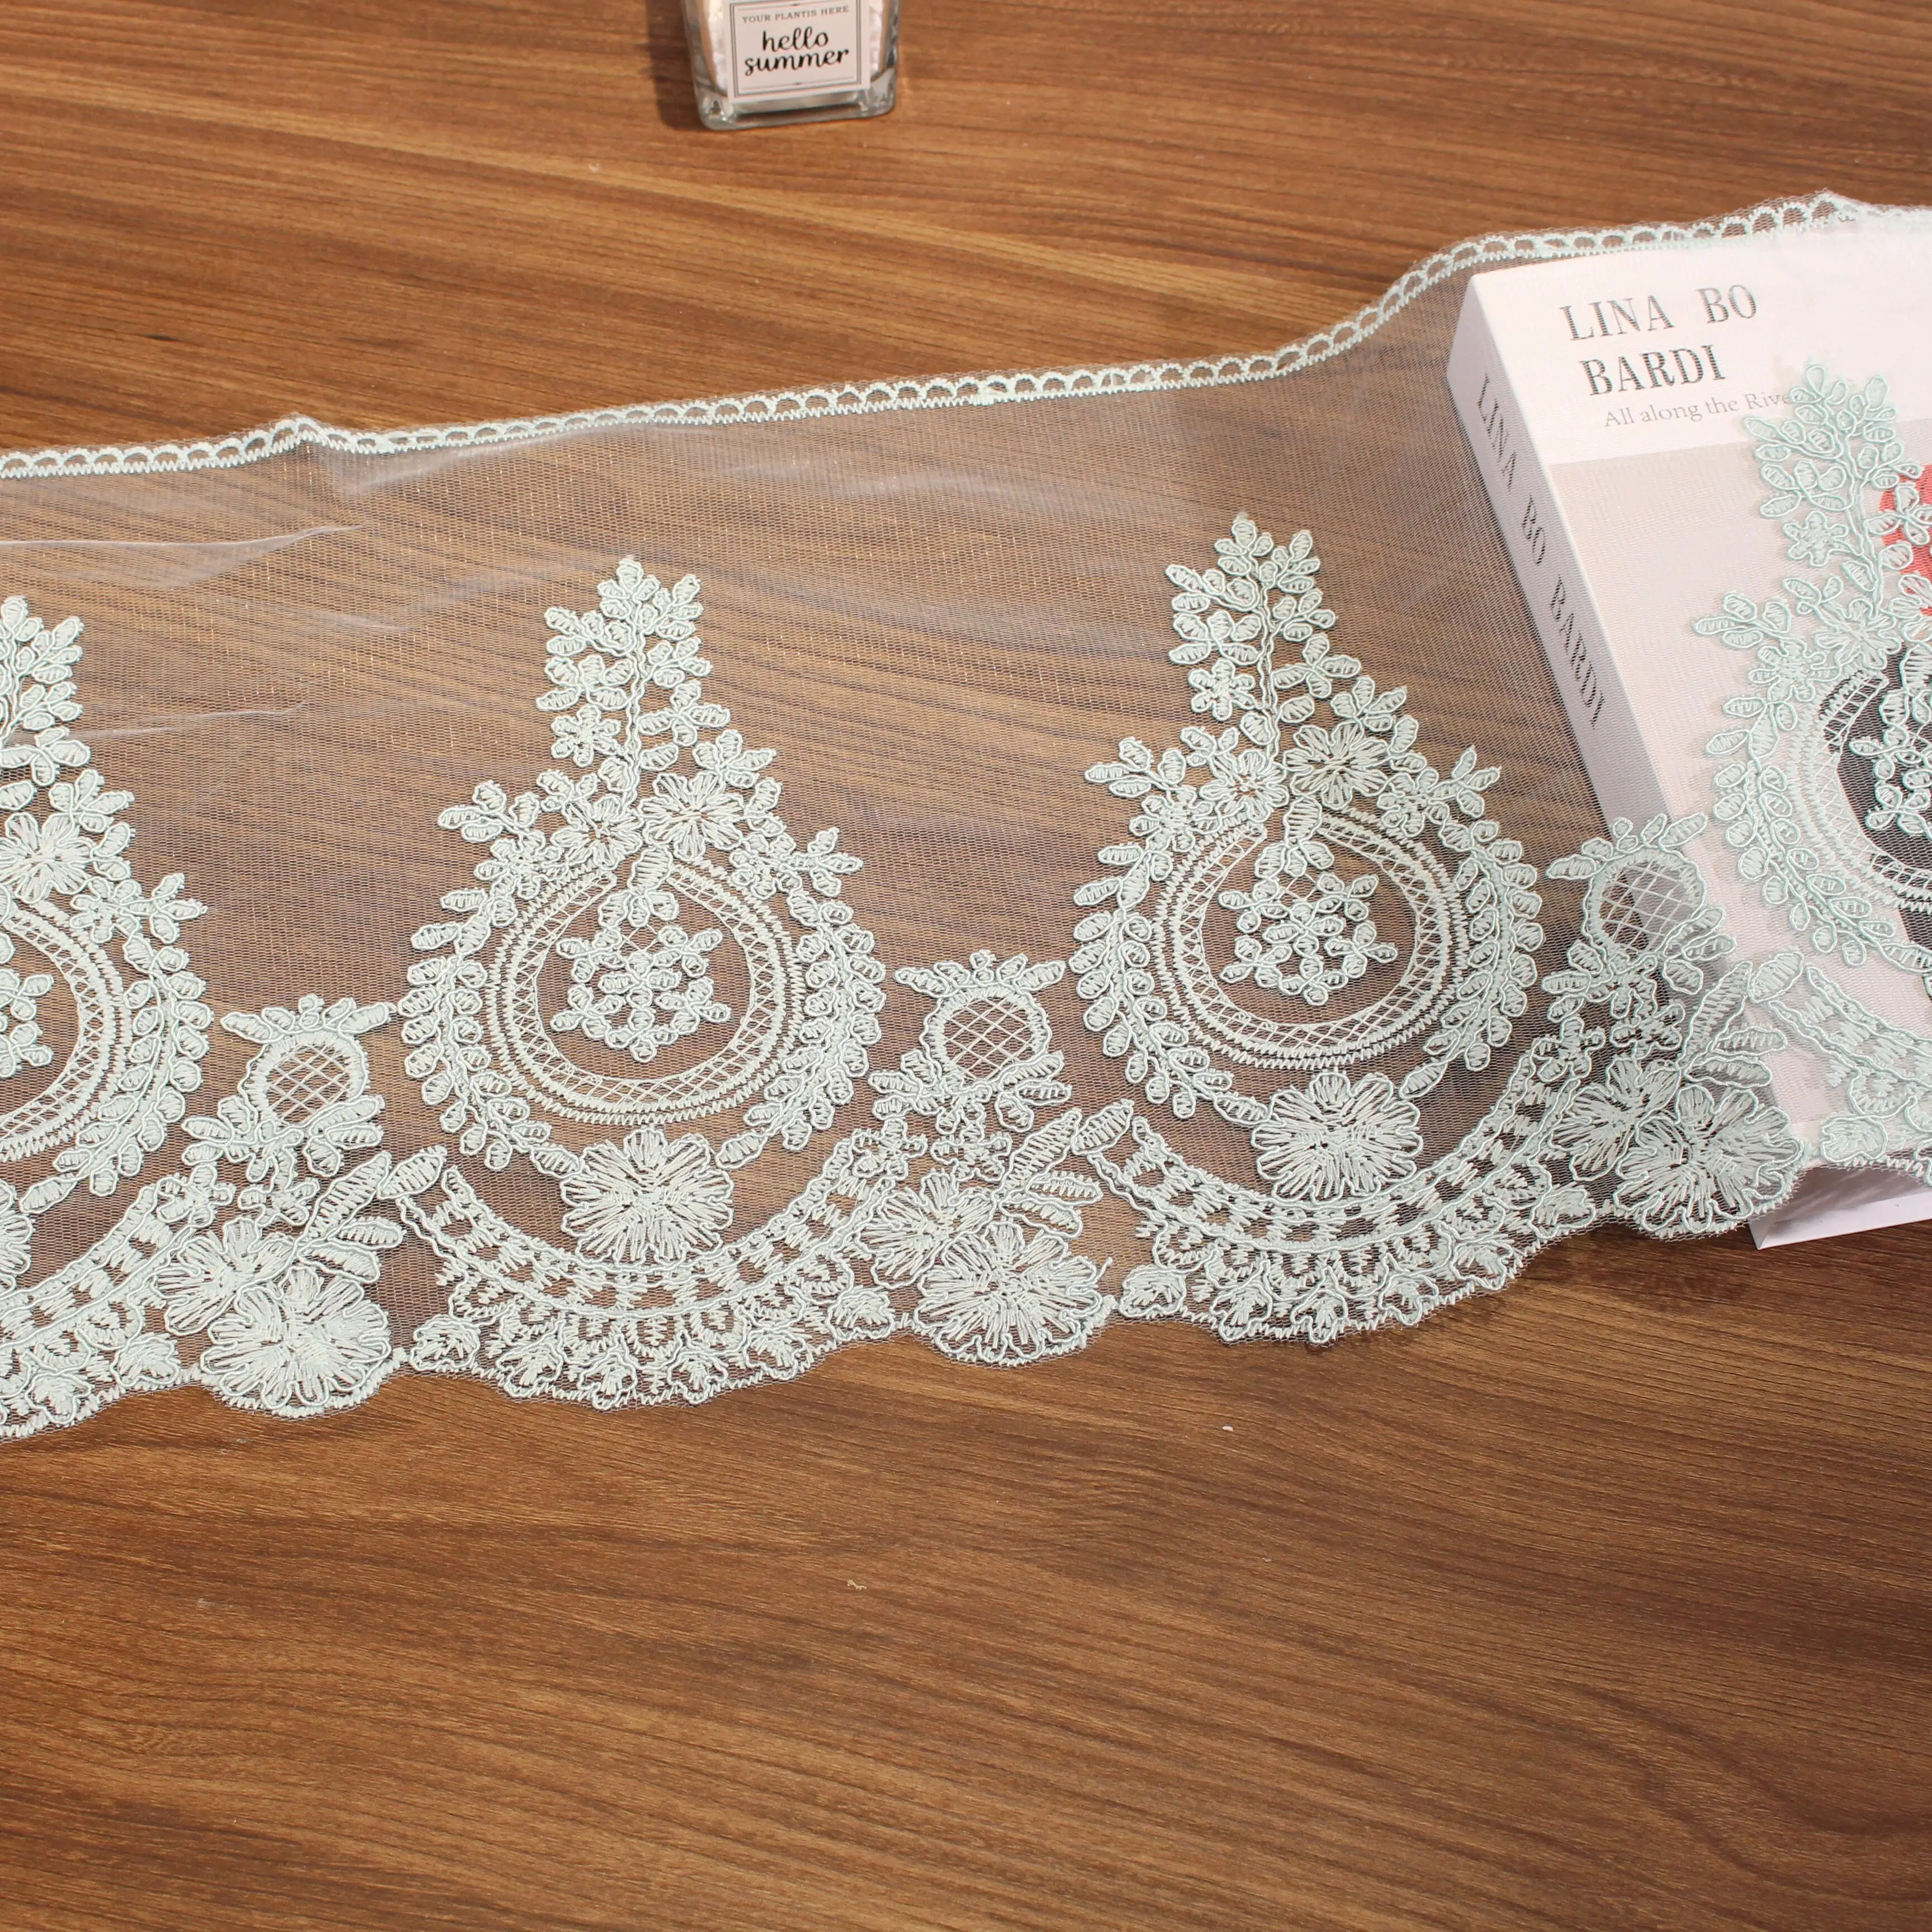 Wholesale Stock pink lace trimming border embroidery fancy embroidery lace trim